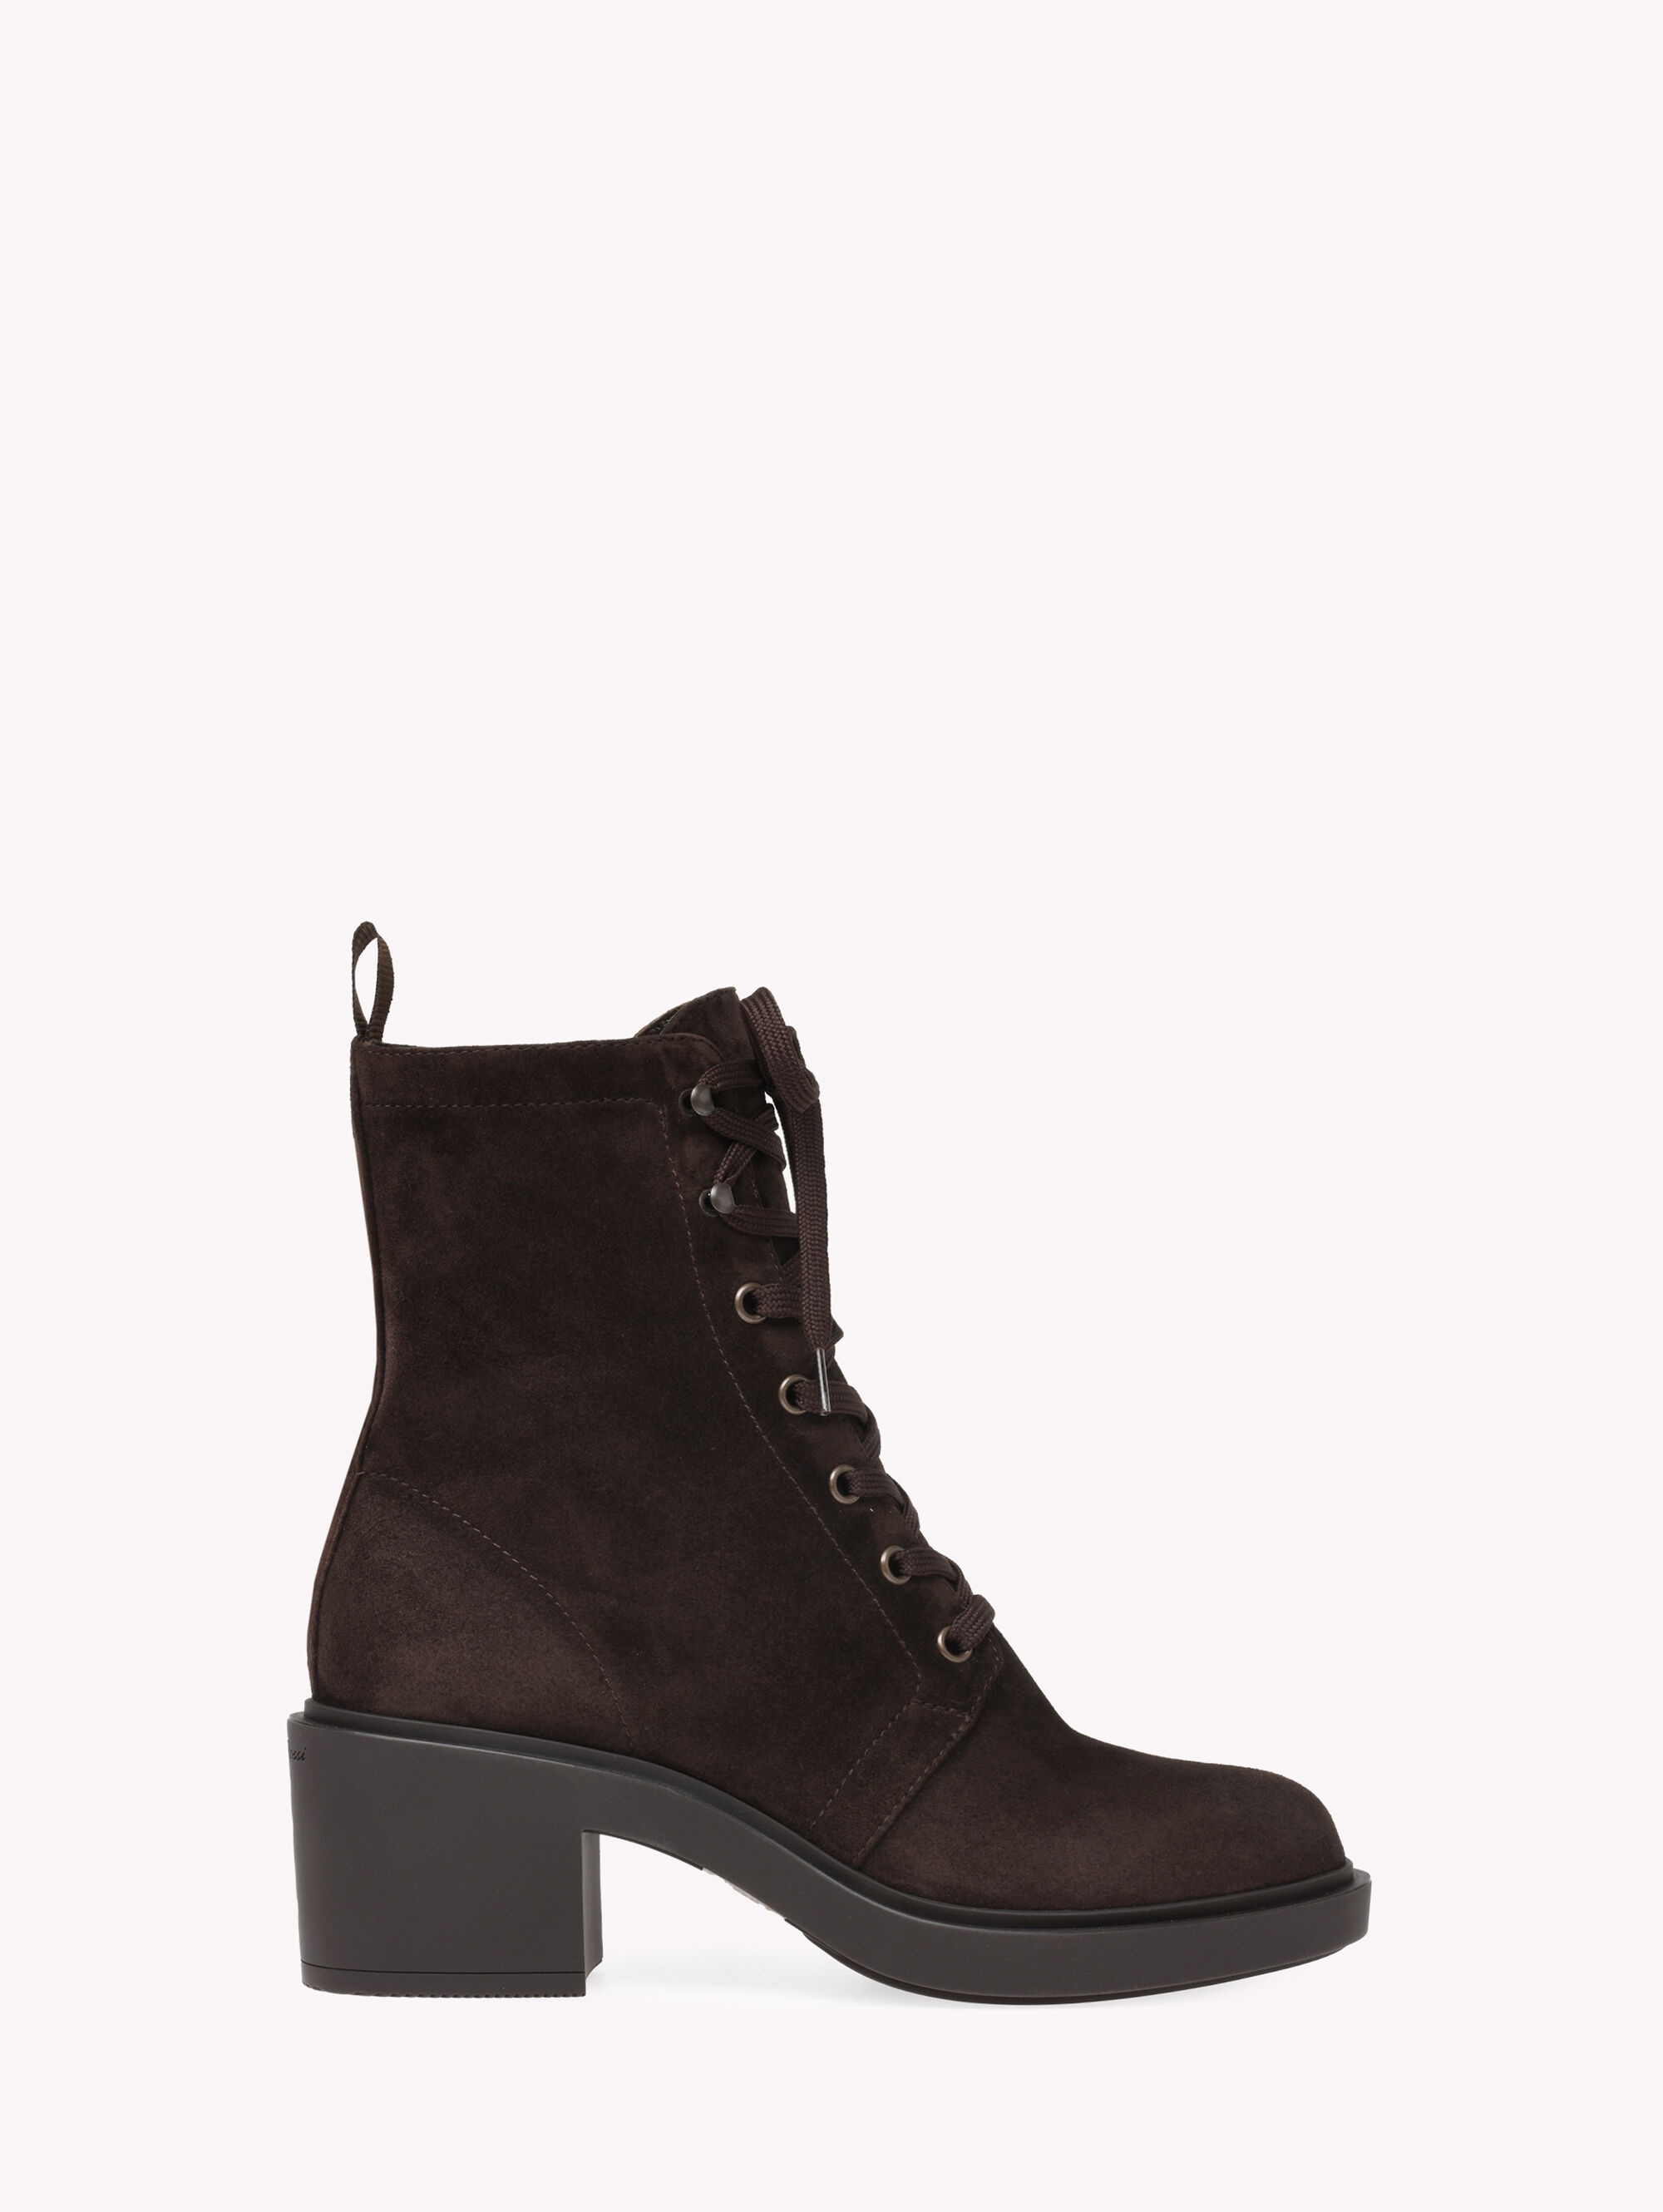 Gianvito Rossi panelled leather boots - Brown